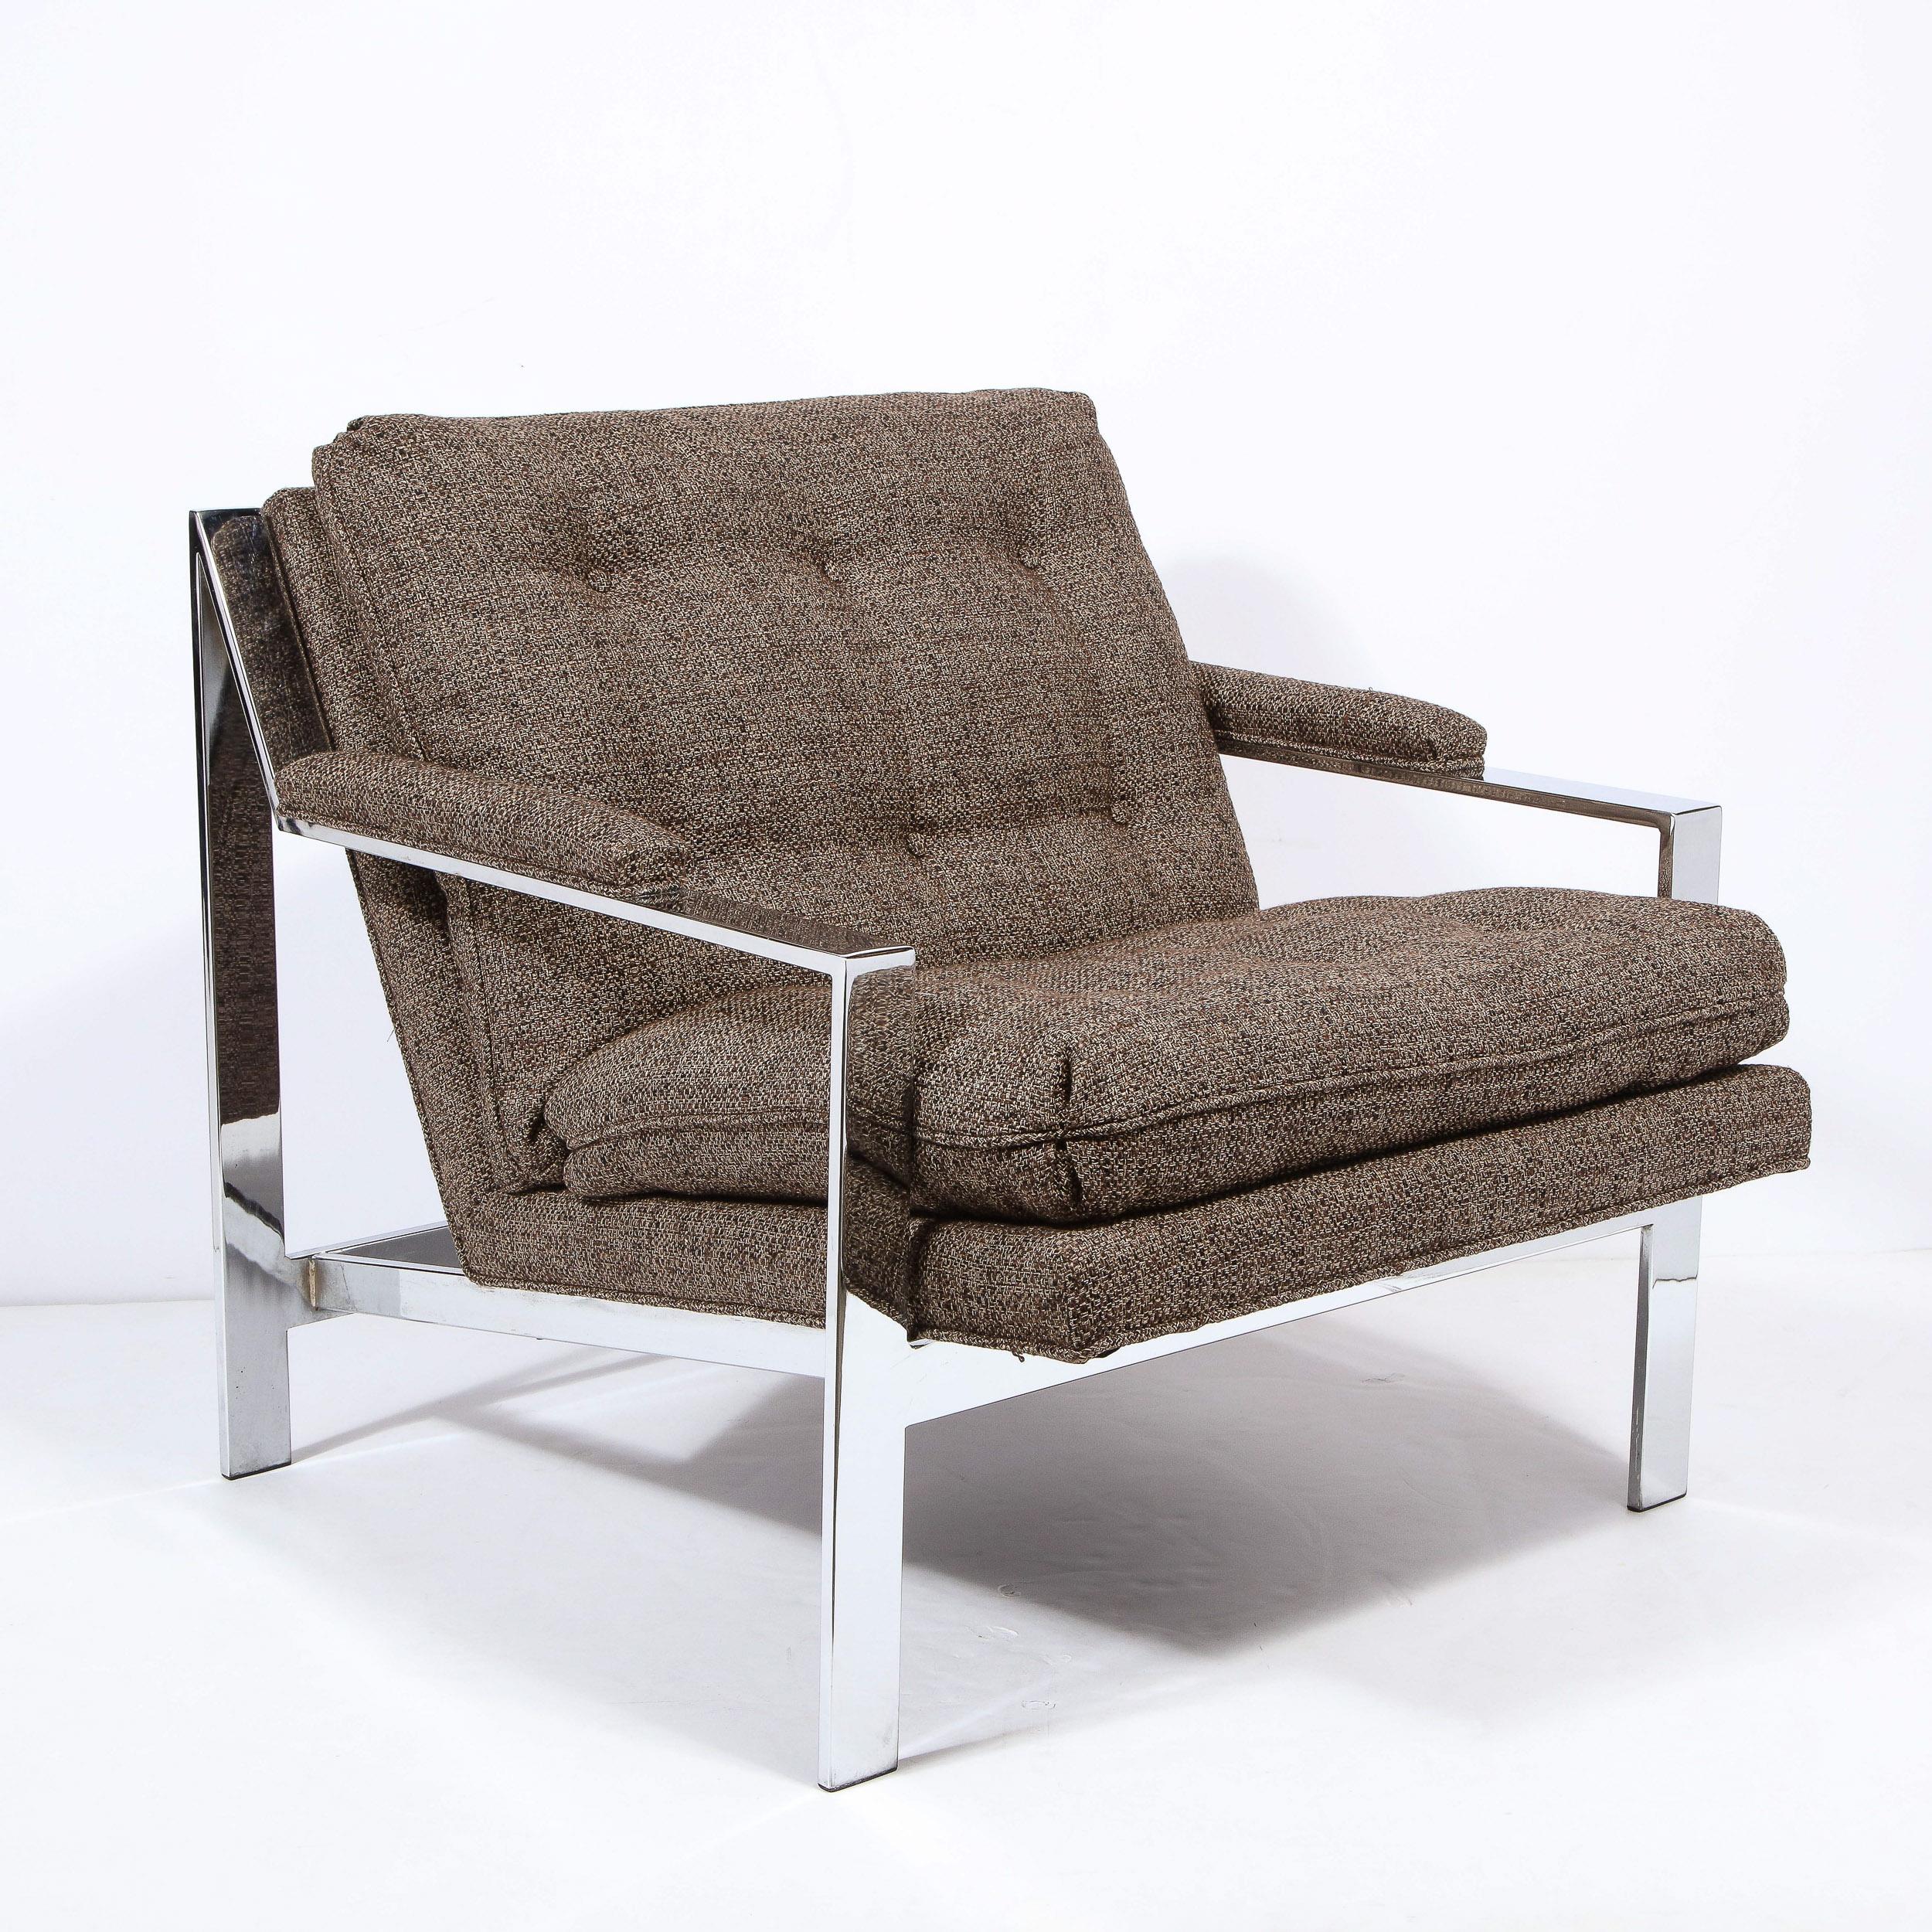 Late 20th Century Mid-Century Modern Chrome Button Back Lounge Chair in Tawny Holly Hunt Tweed For Sale